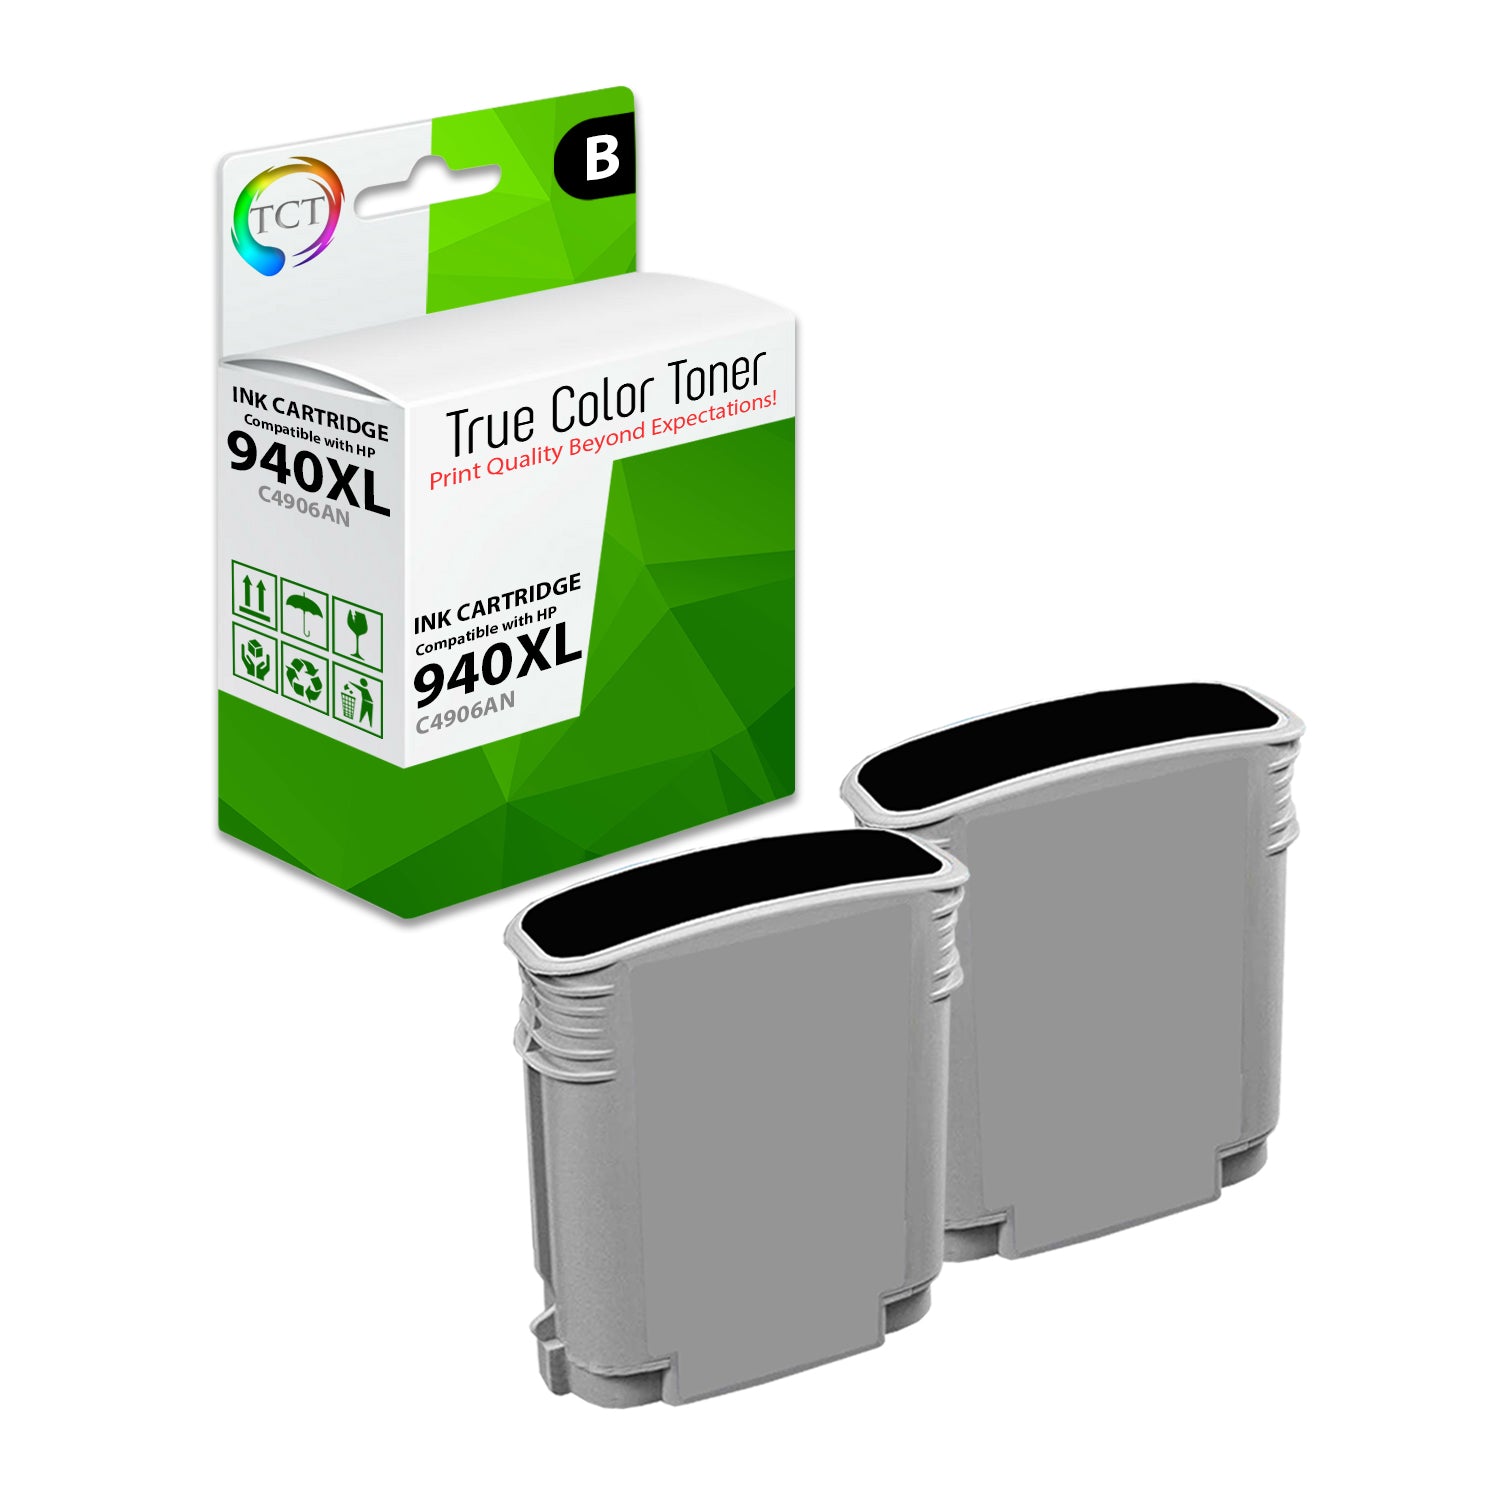 TCT Compatible Ink Cartridge Replacement for the HP 940XL Series - 2 Pack Black